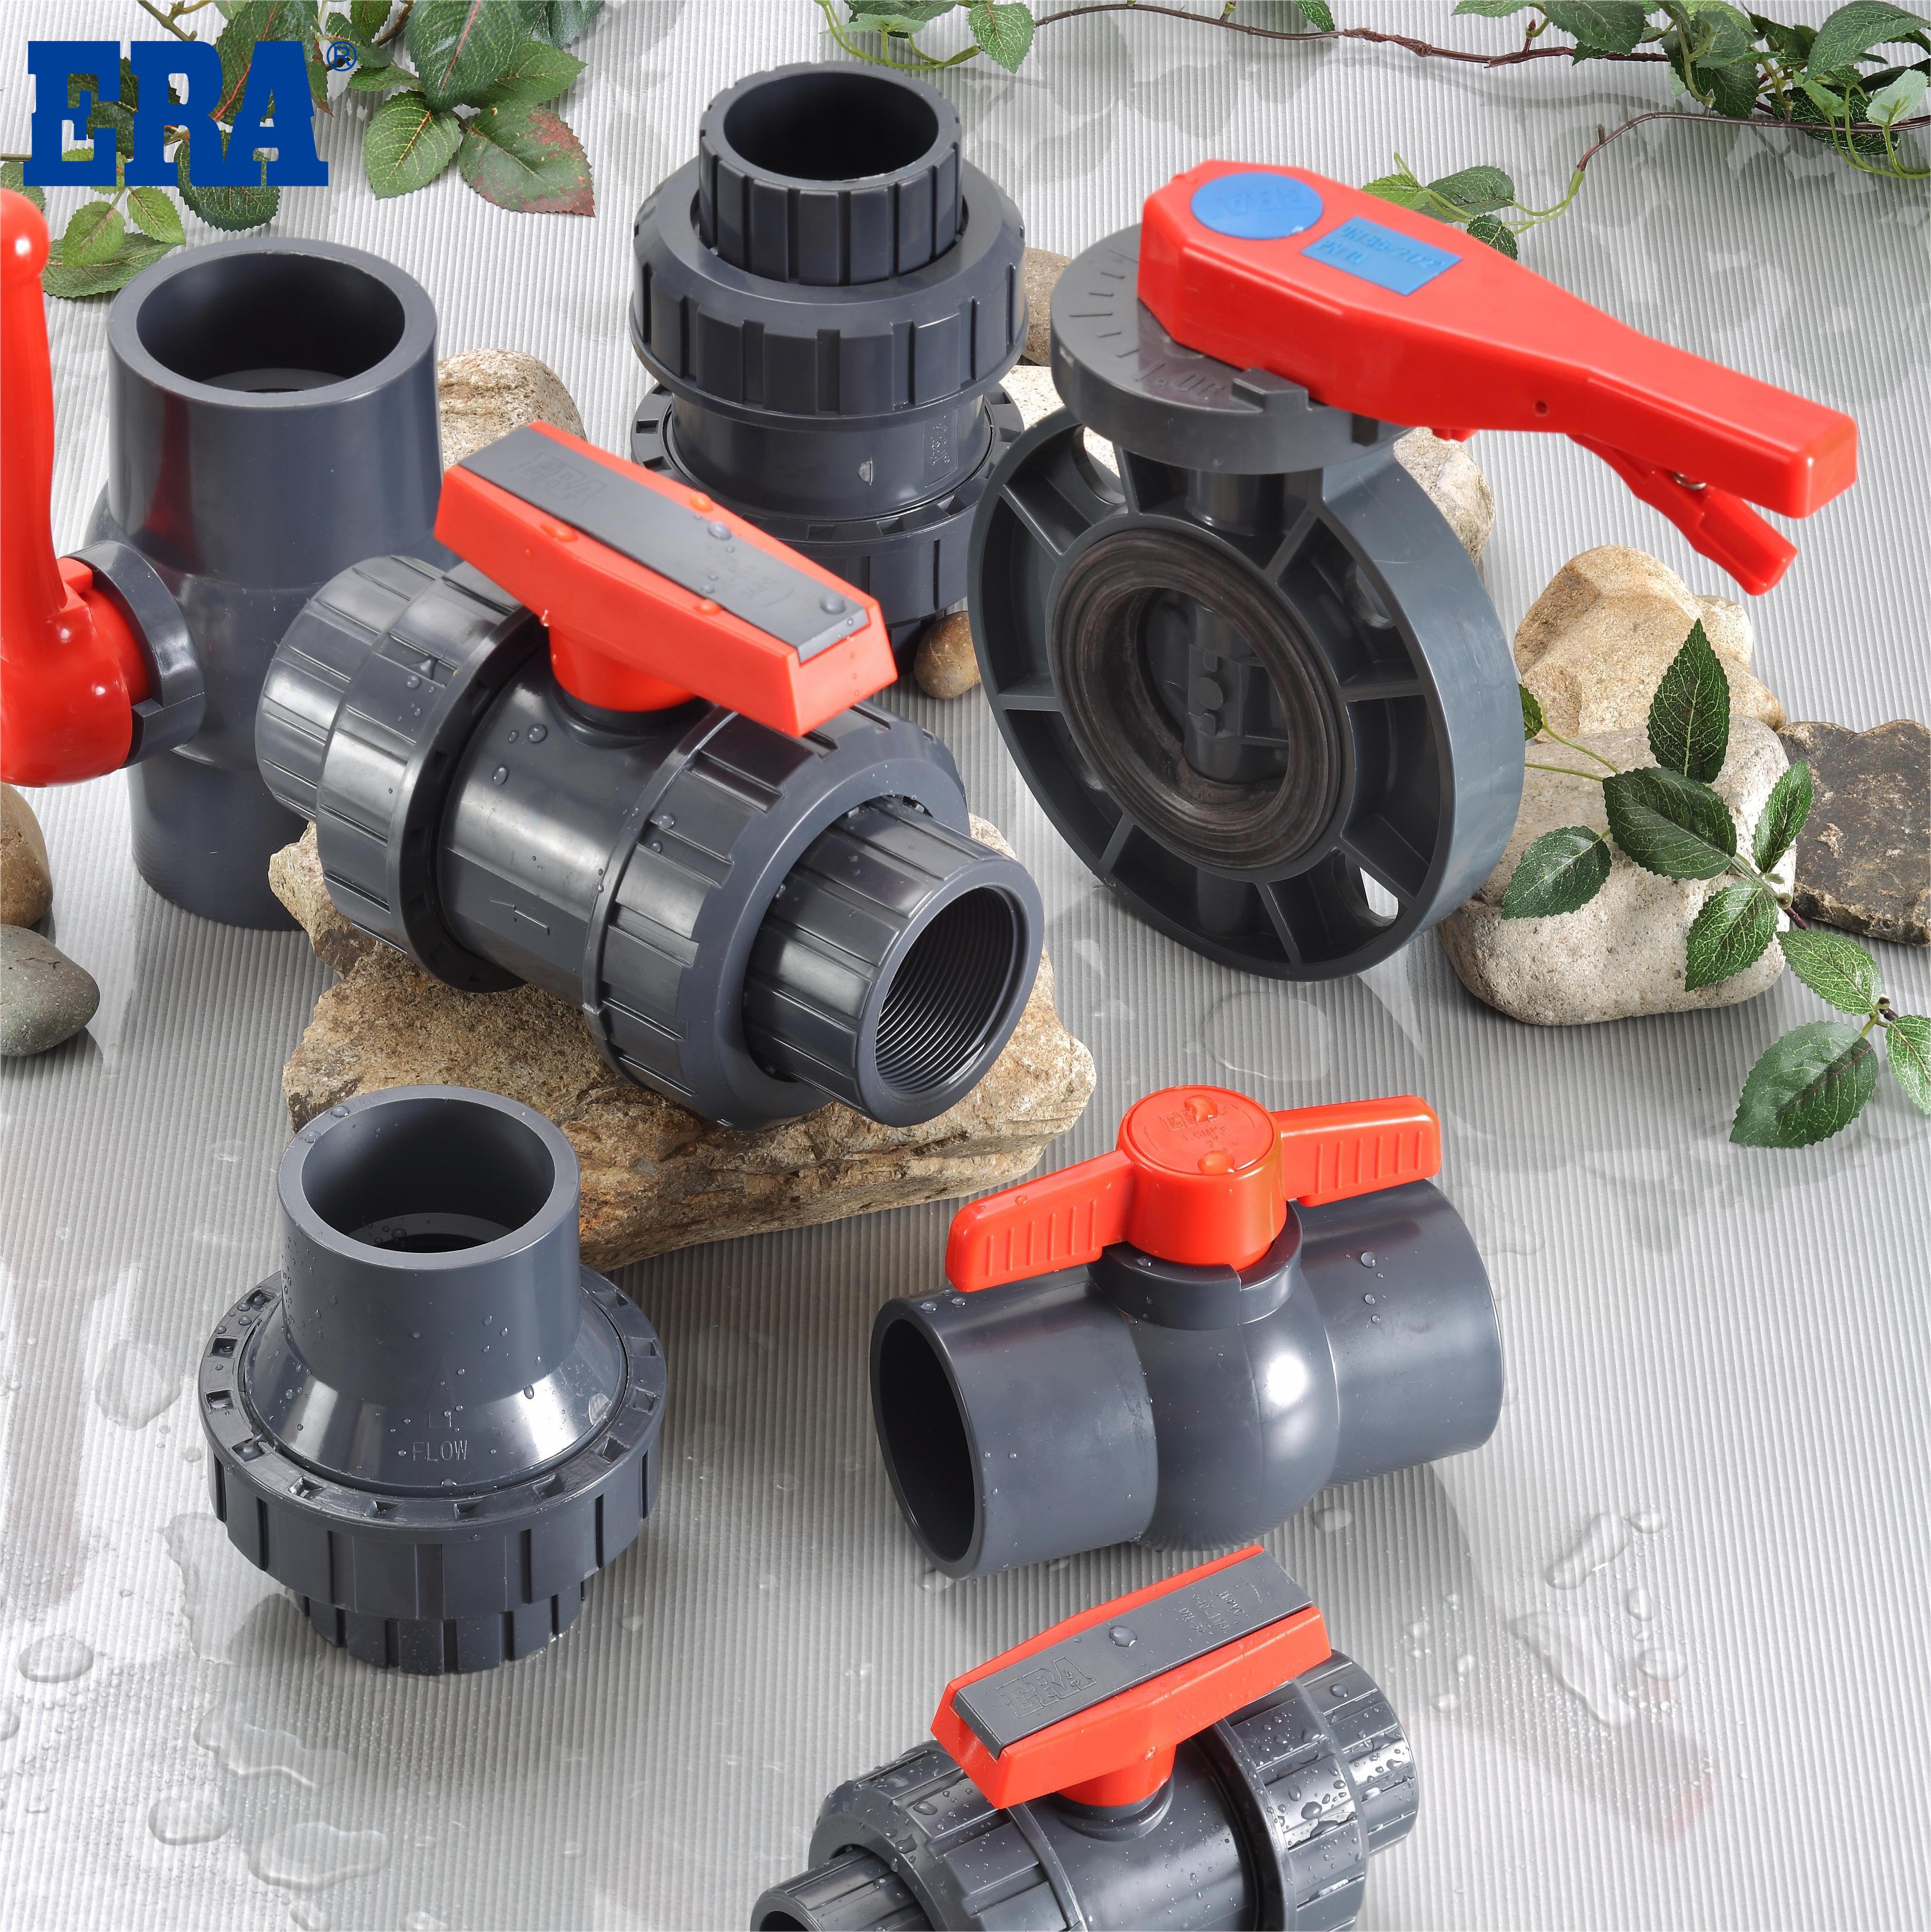 PVC PLASTIC VALVES AND FITTINGS